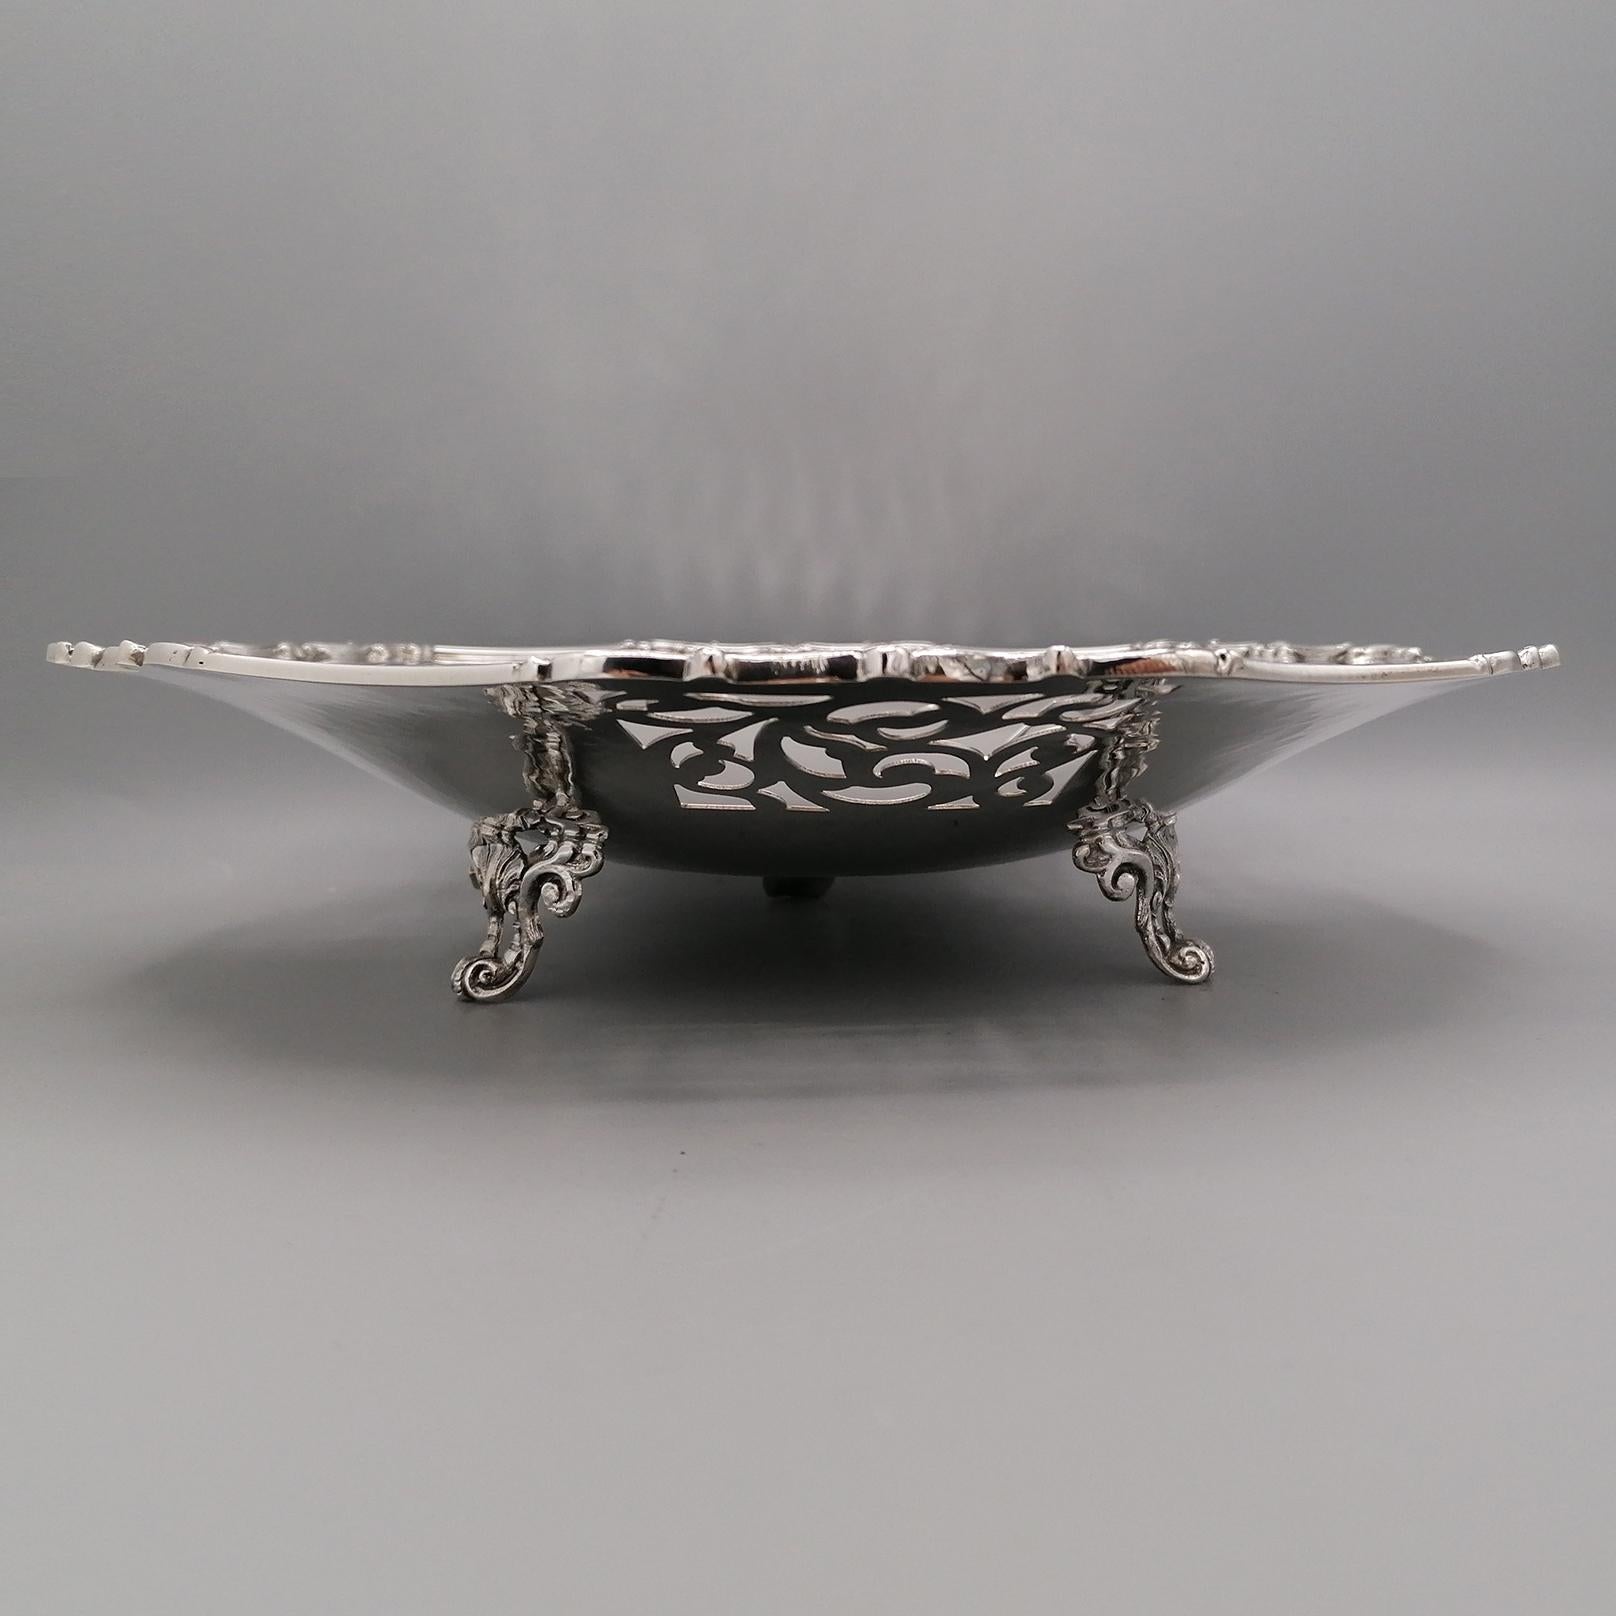 Contemporary Italian Solid Silver Centerpiece Baroque revival style on feet For Sale